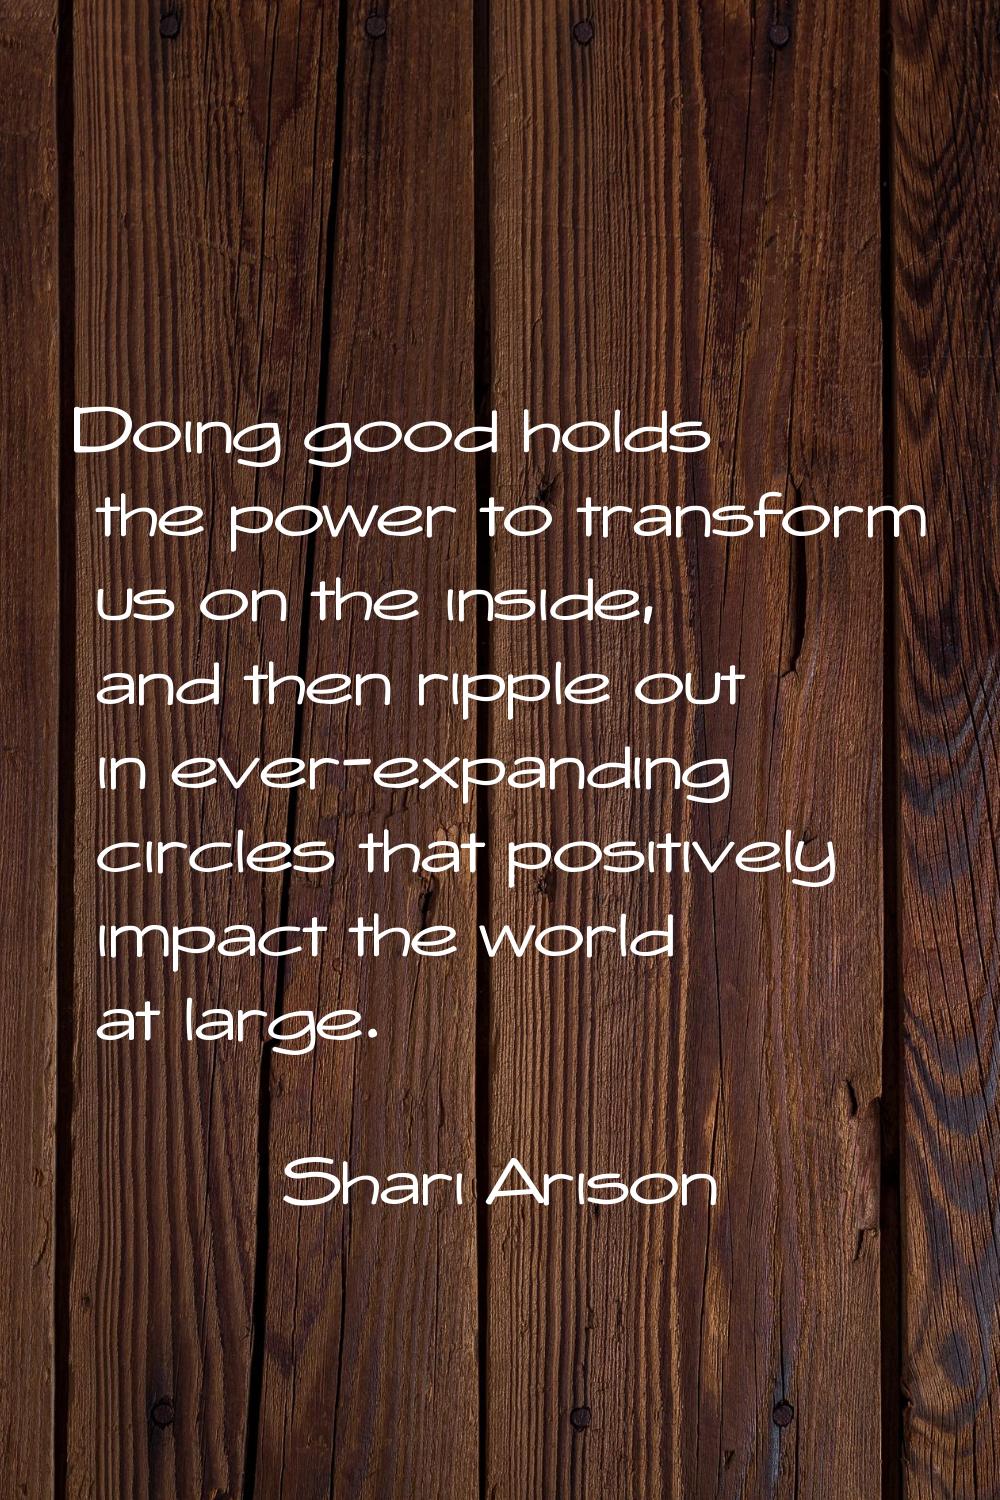 Doing good holds the power to transform us on the inside, and then ripple out in ever-expanding cir